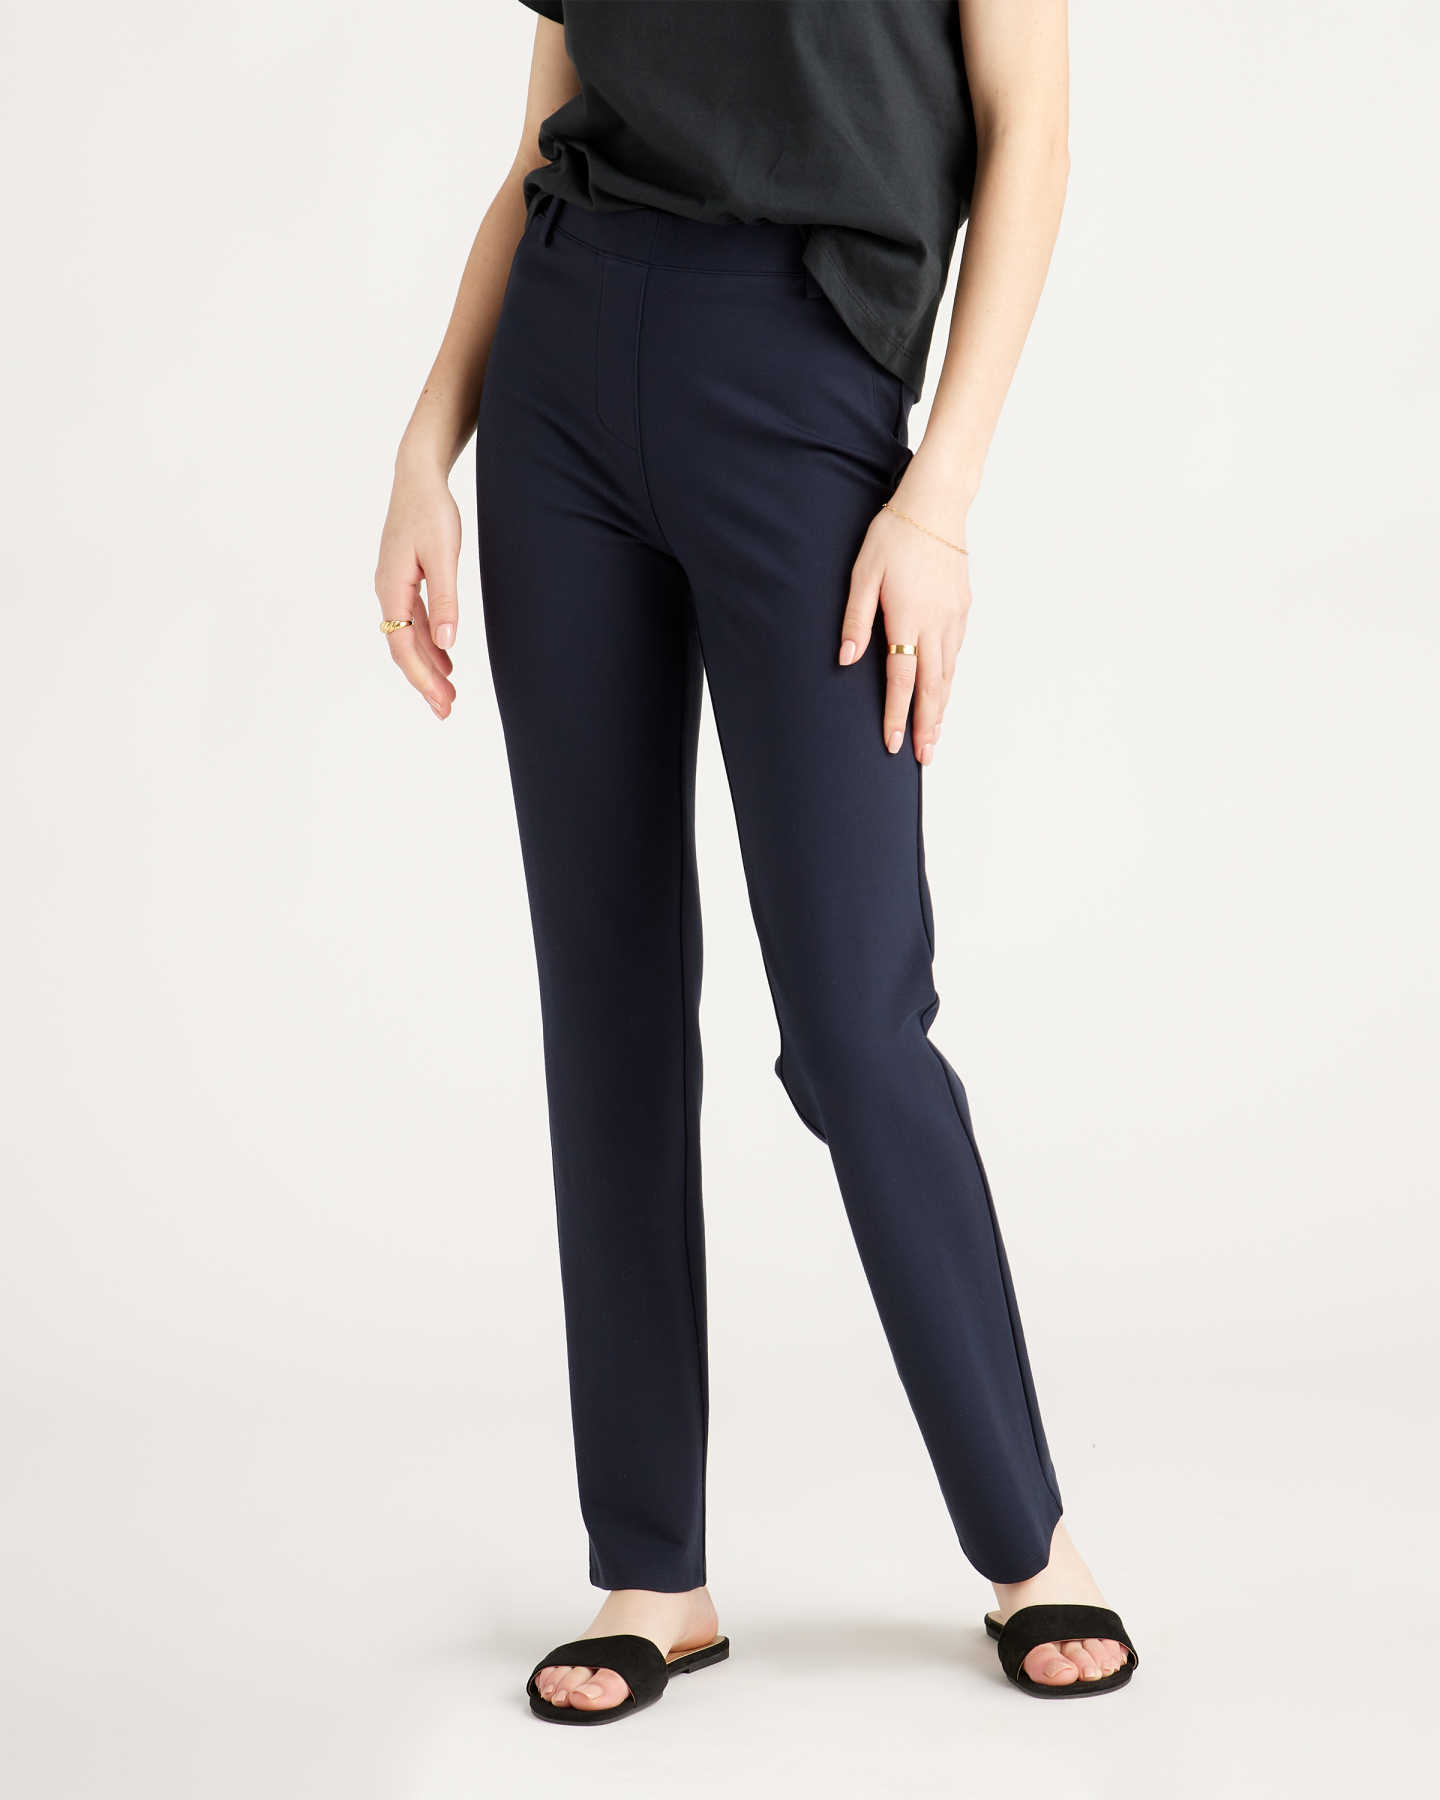 You May Also Like - Ultra-Stretch Ponte Straight Leg Pant - Tall - Navy